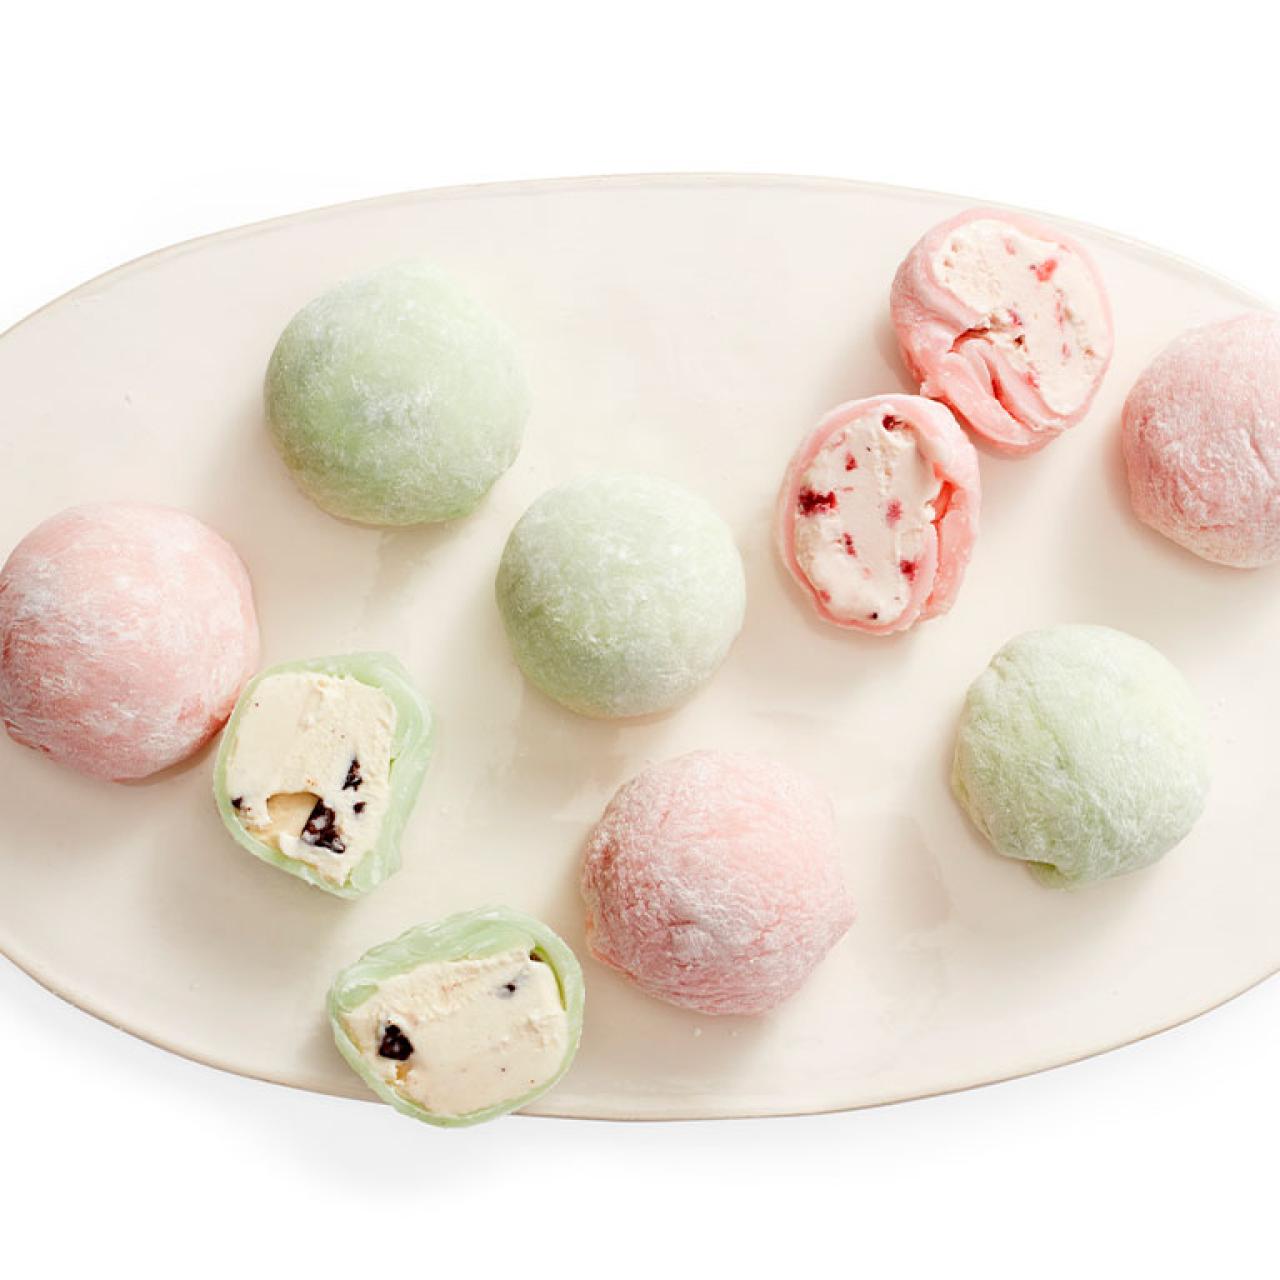 The DIY Mochi Ice Cream Kit! Make Your Own Japanese Ice Cream Balls! Sweet  & Chewy On The Outside And Cold And Creamy On The Inside! Great Homemade